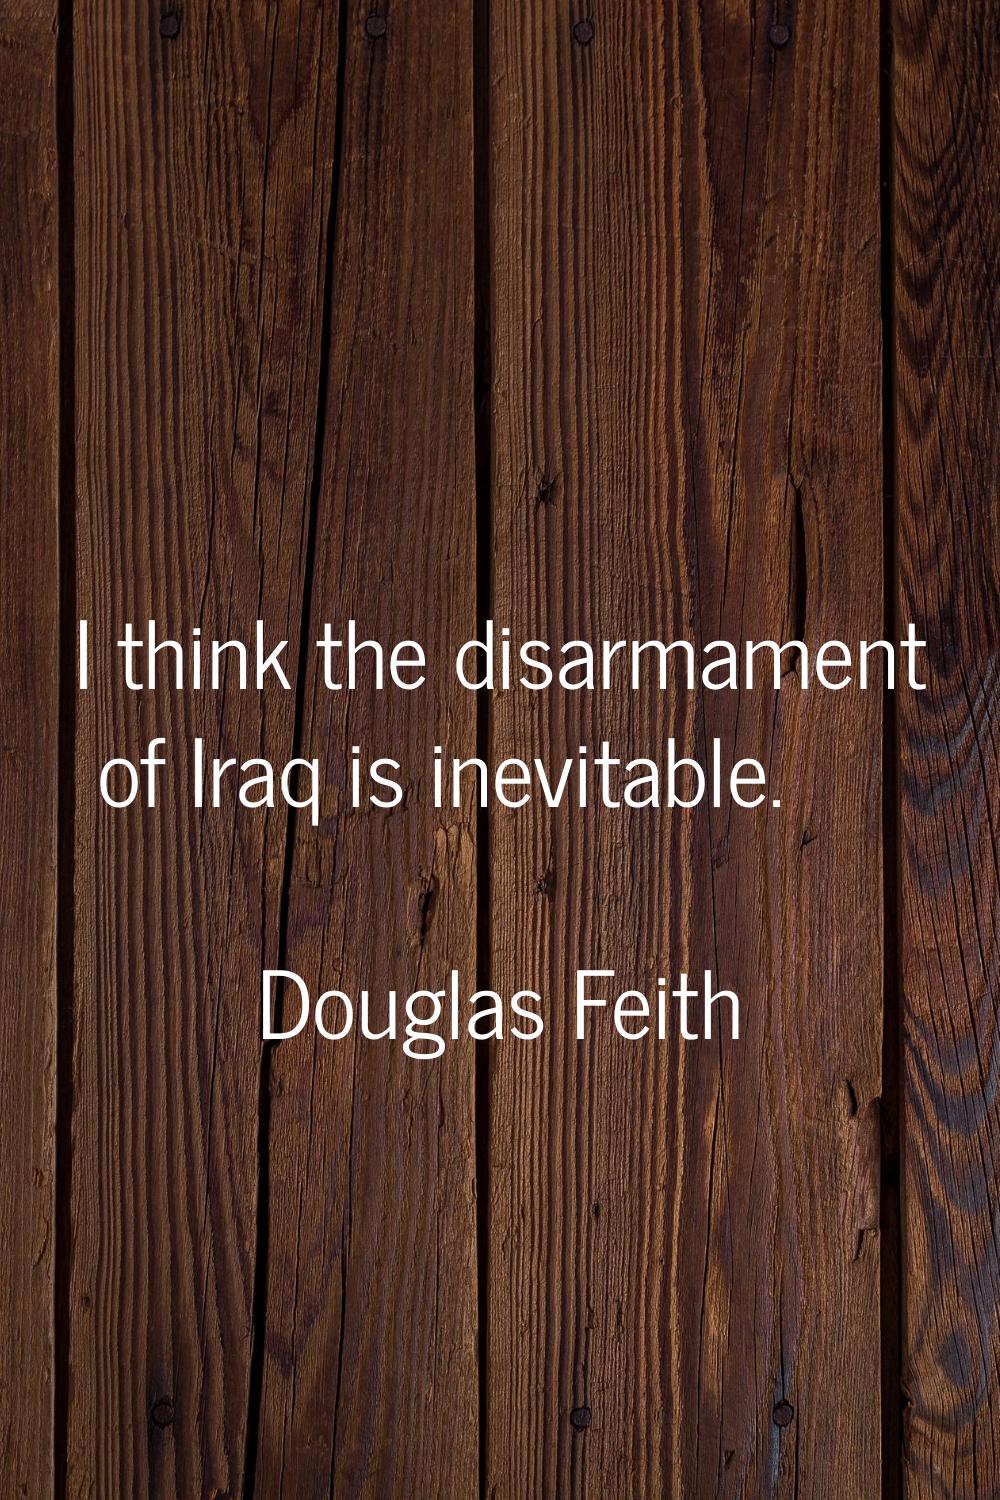 I think the disarmament of Iraq is inevitable.